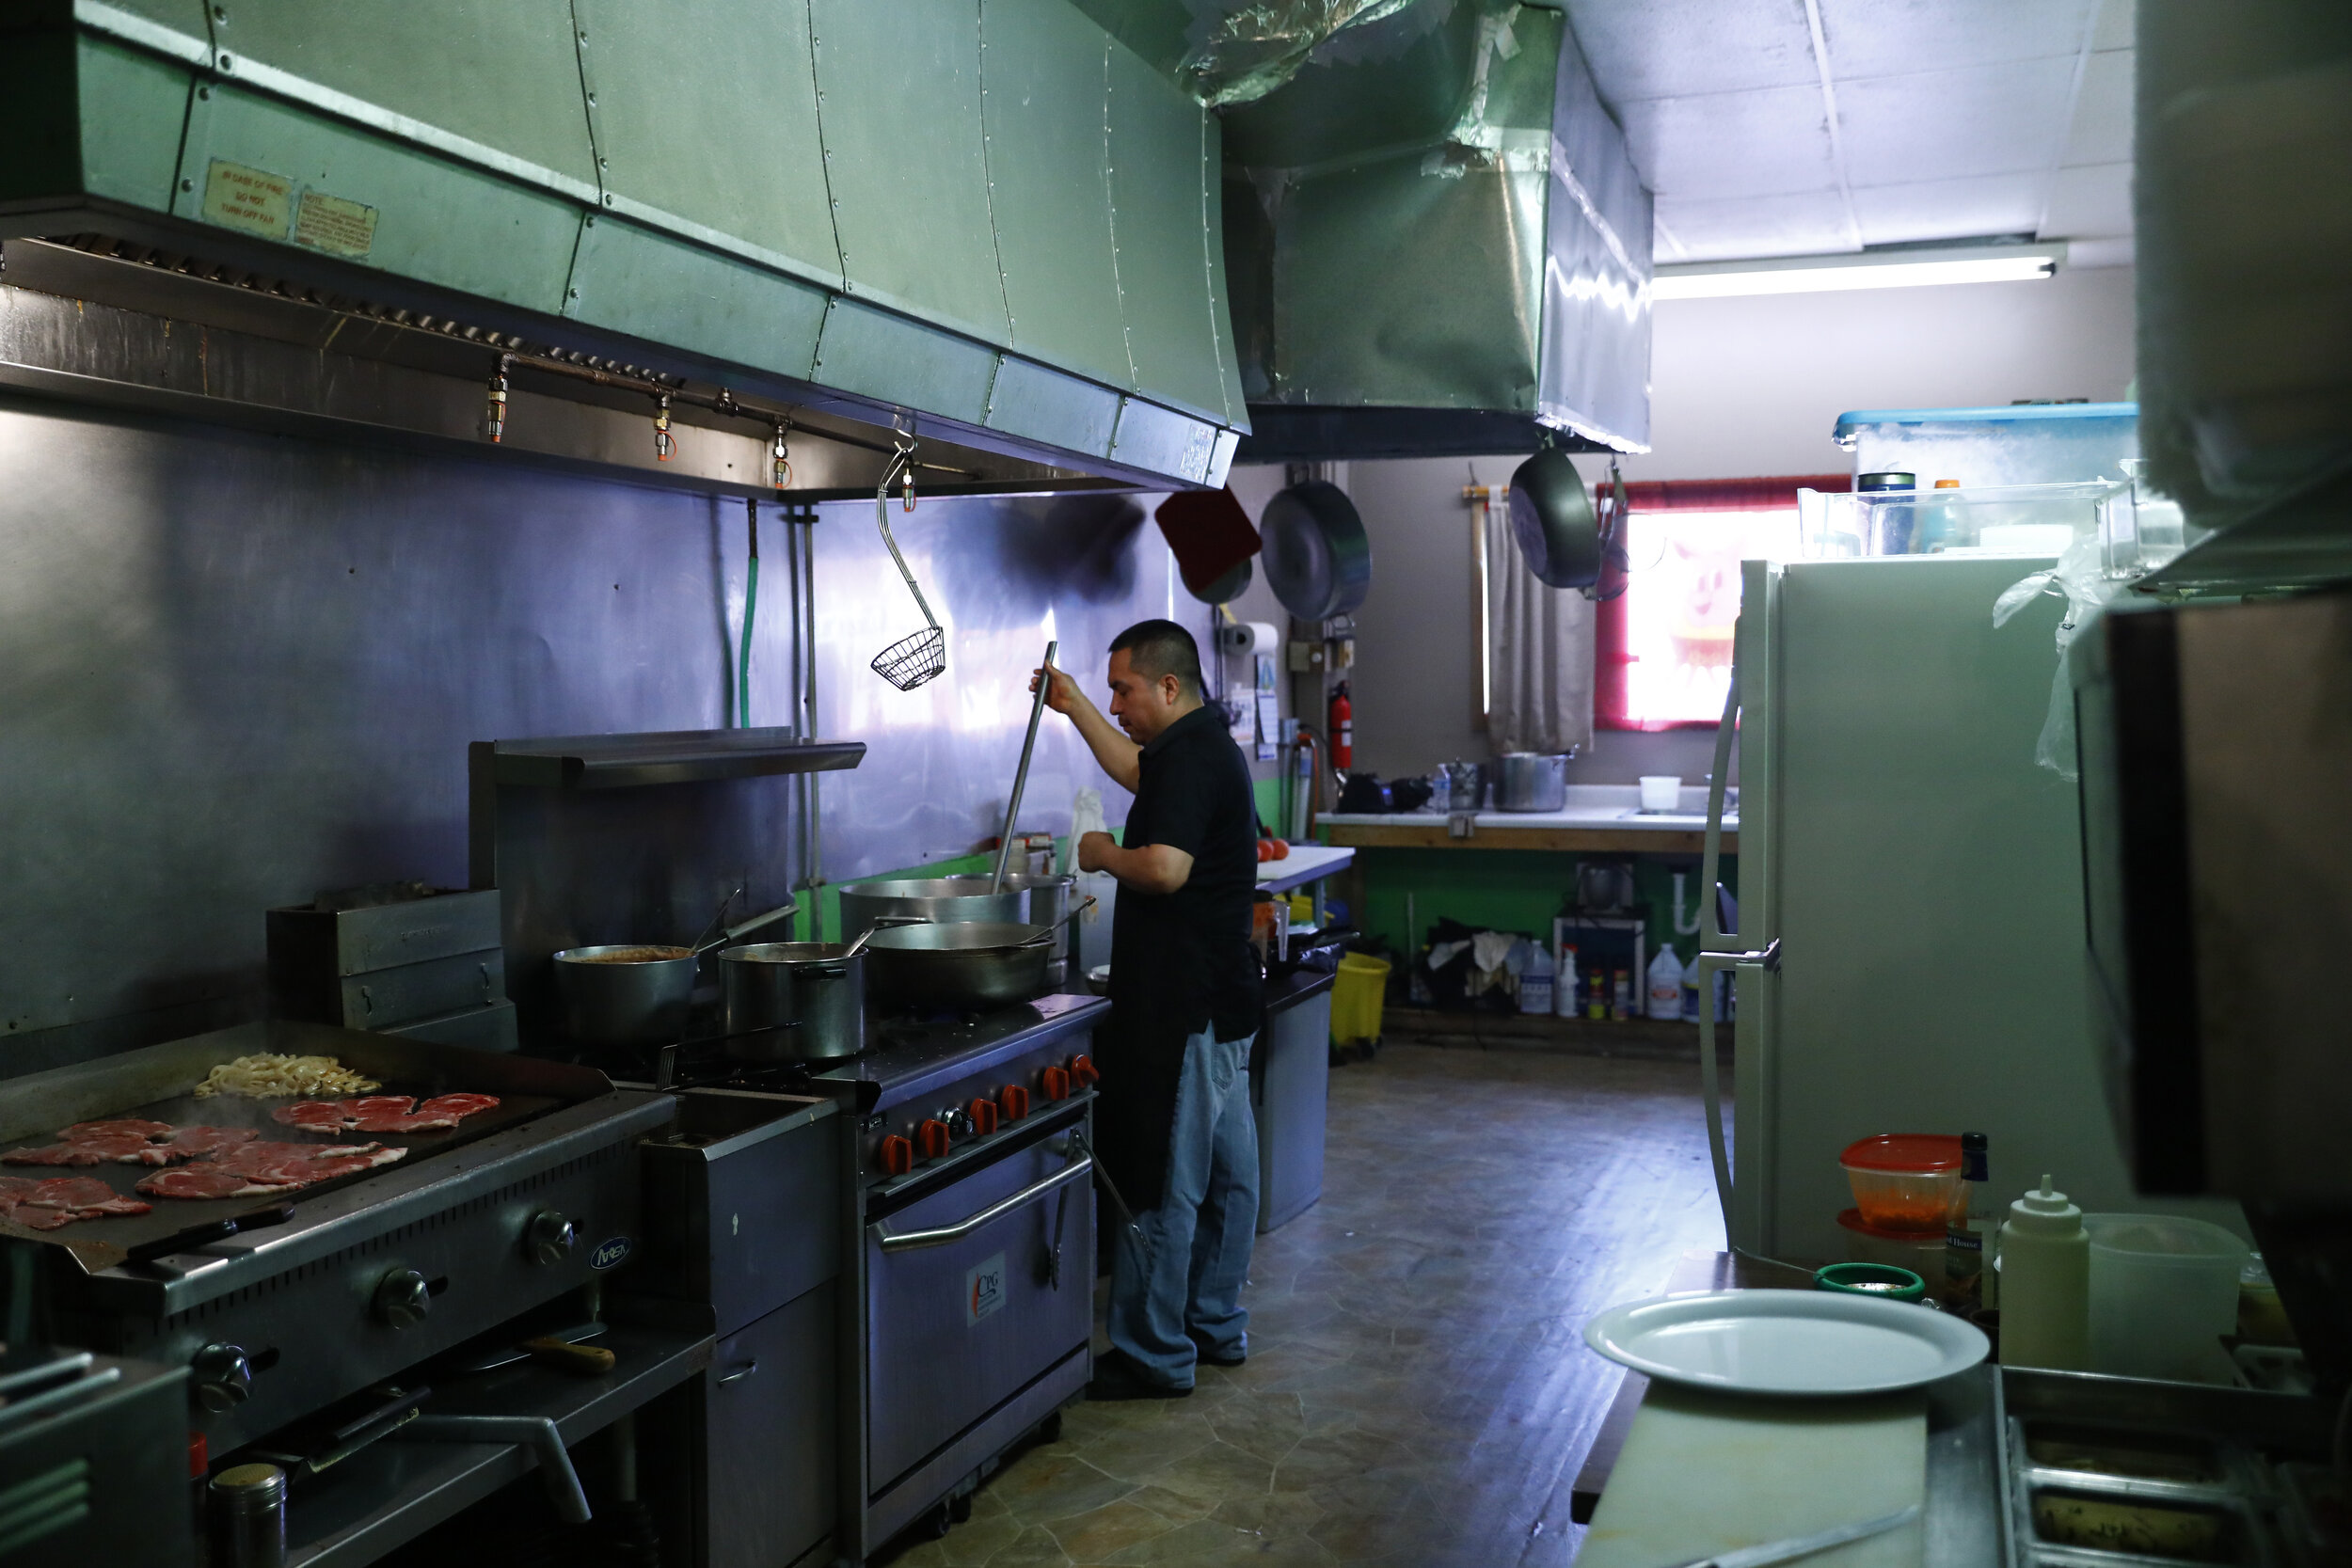   The kitchen of a Mexican restaurant in West Liberty, IA. 2019. The town is in Muscatine County, Iowa, and as of the 2010 U.S. Census was the only city in the state to have a majority Hispanic population.  